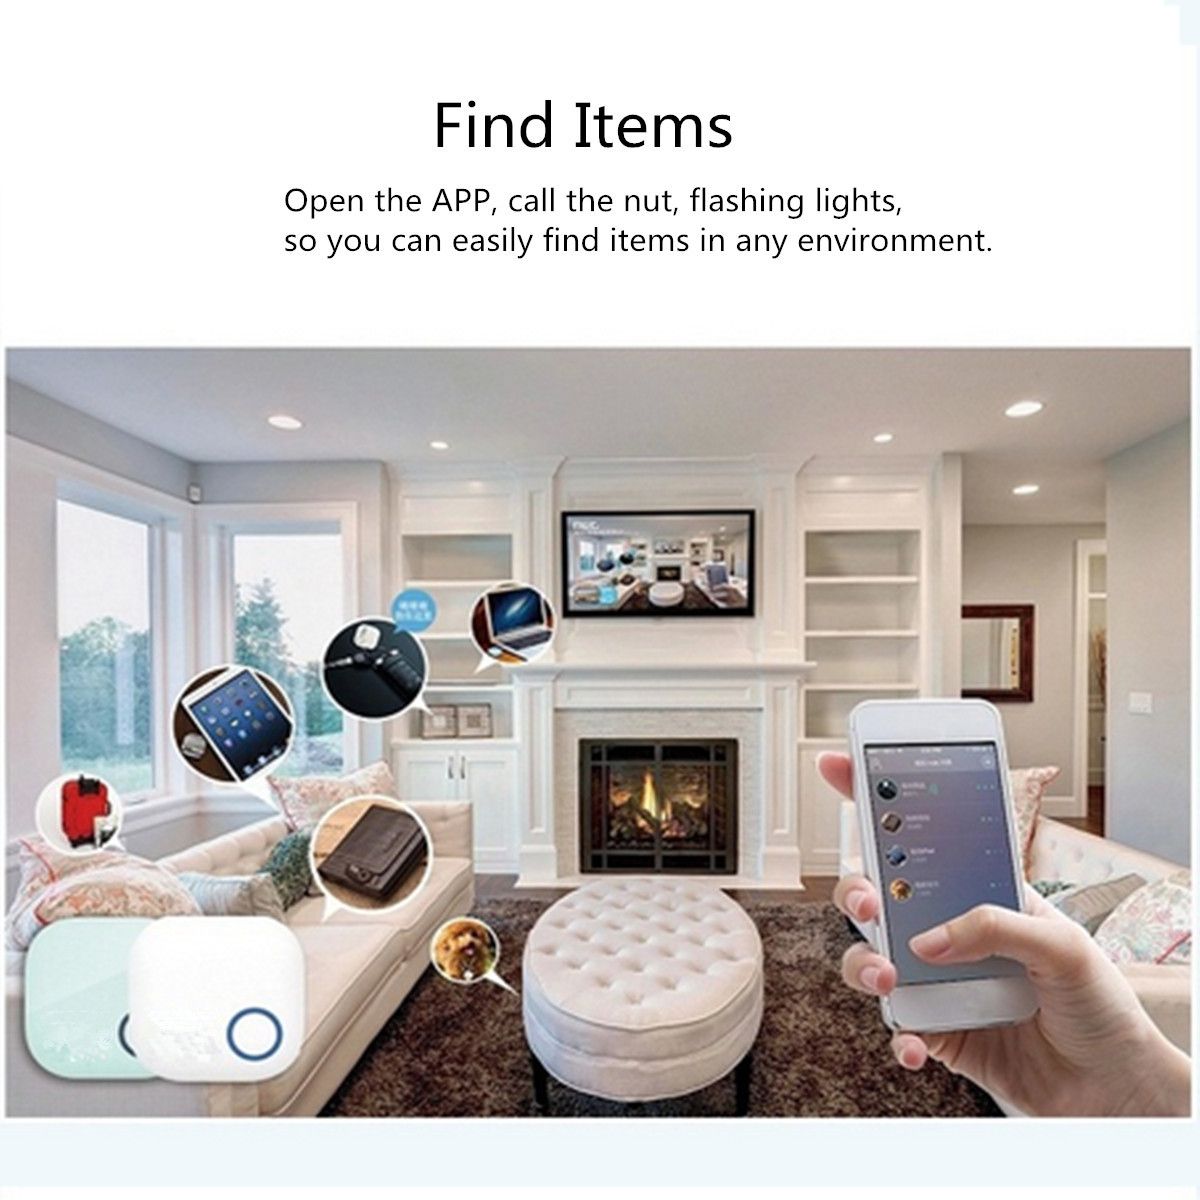 bluetooth-40-Anti-Lost-Tracker-Key-Finder-Locator-for-IOS-Android-System-1124889